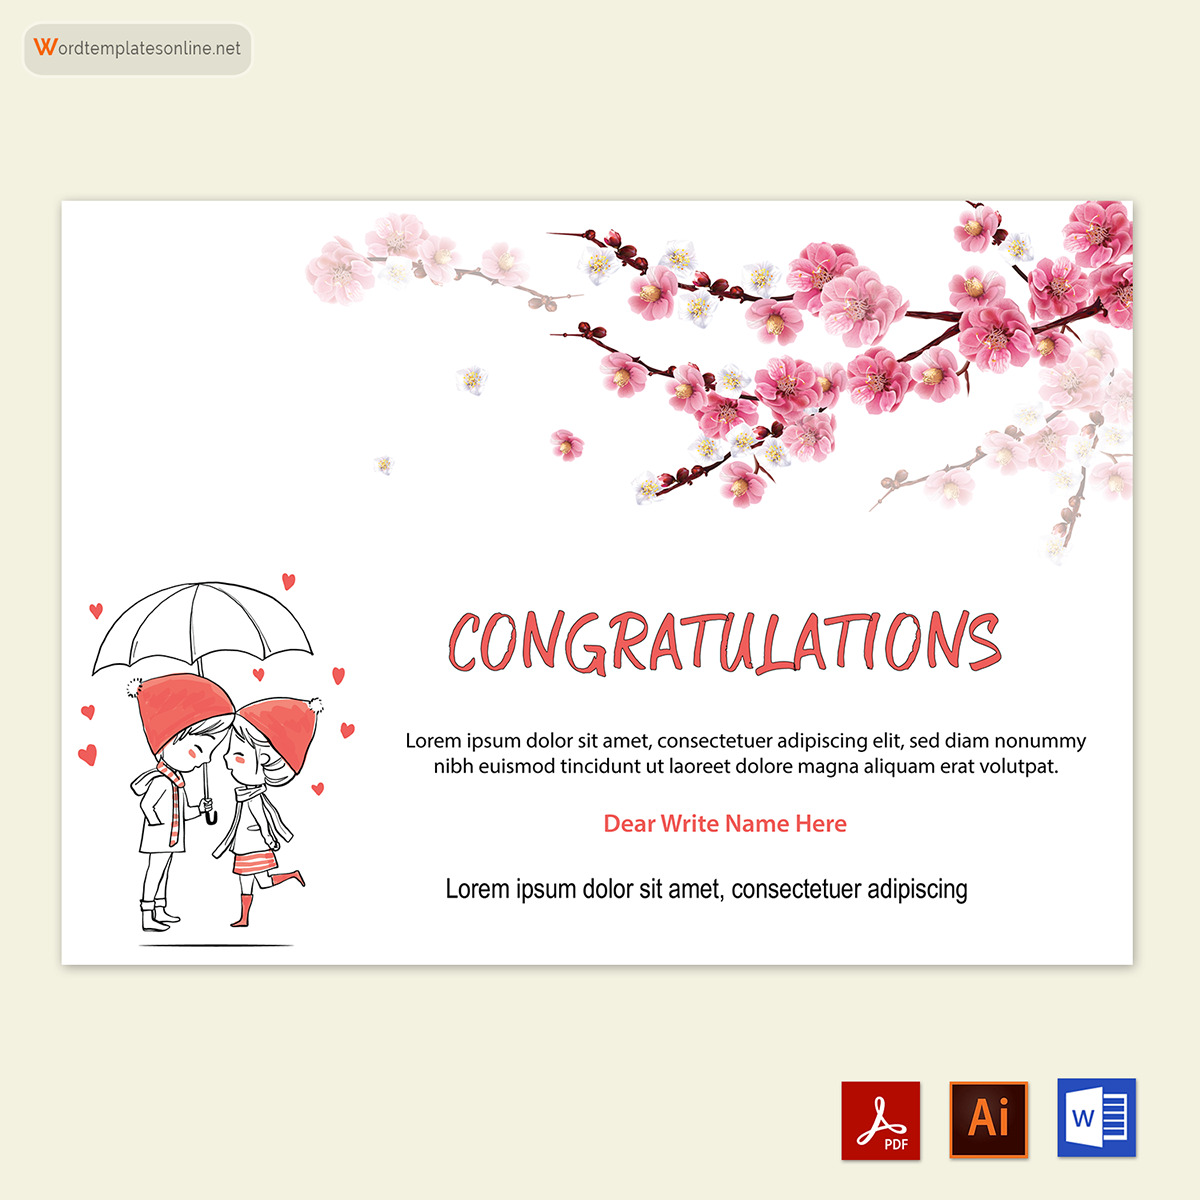 "Editable congratulations card template in Word"